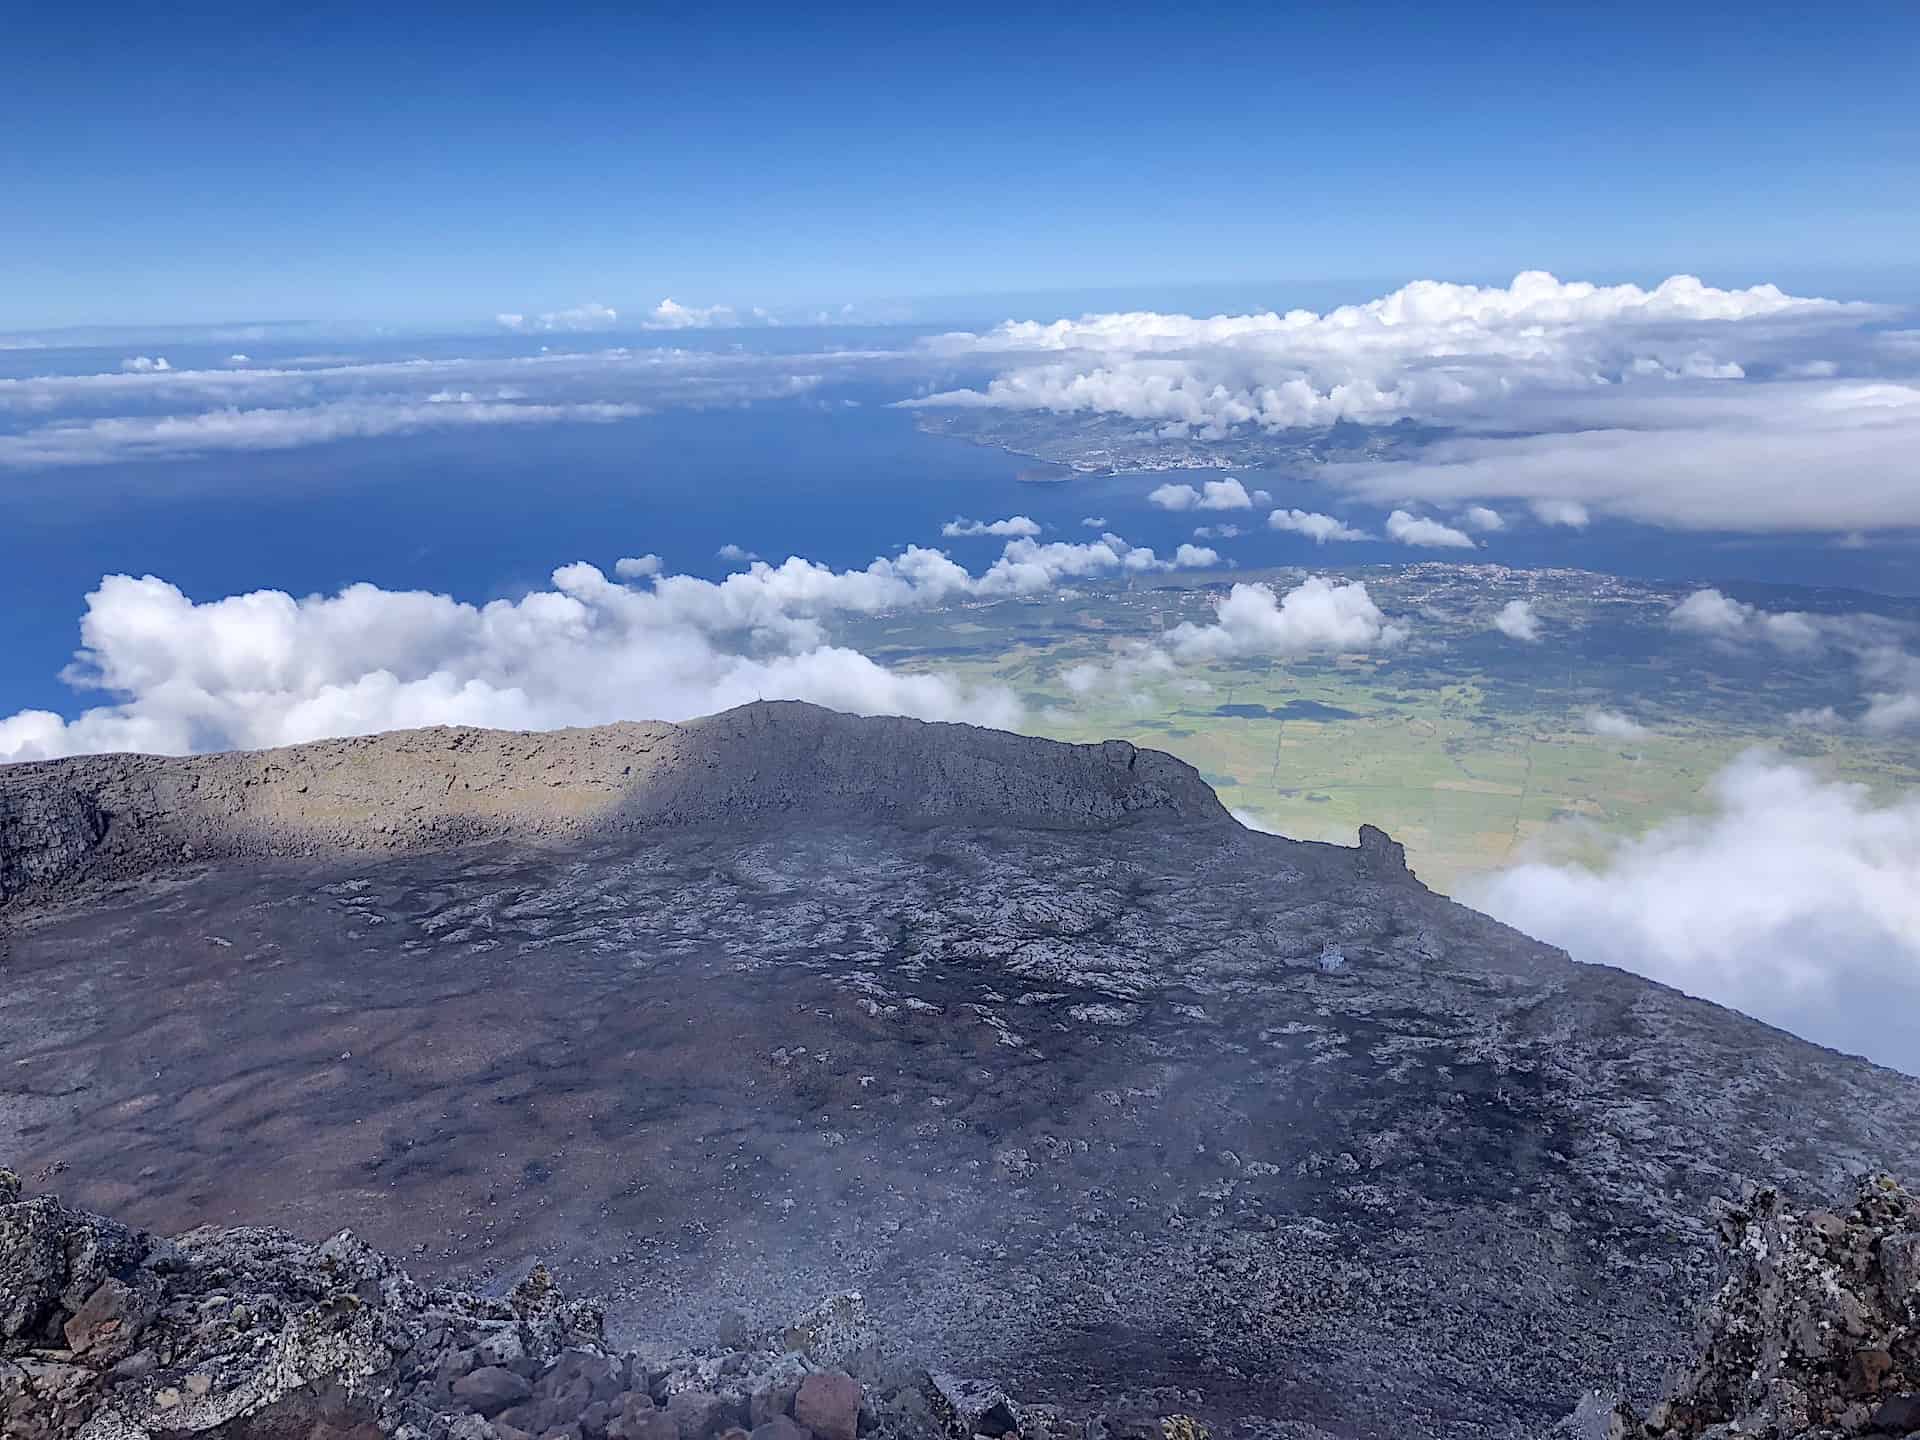 Hiking Mount Pico – A Complete Guide